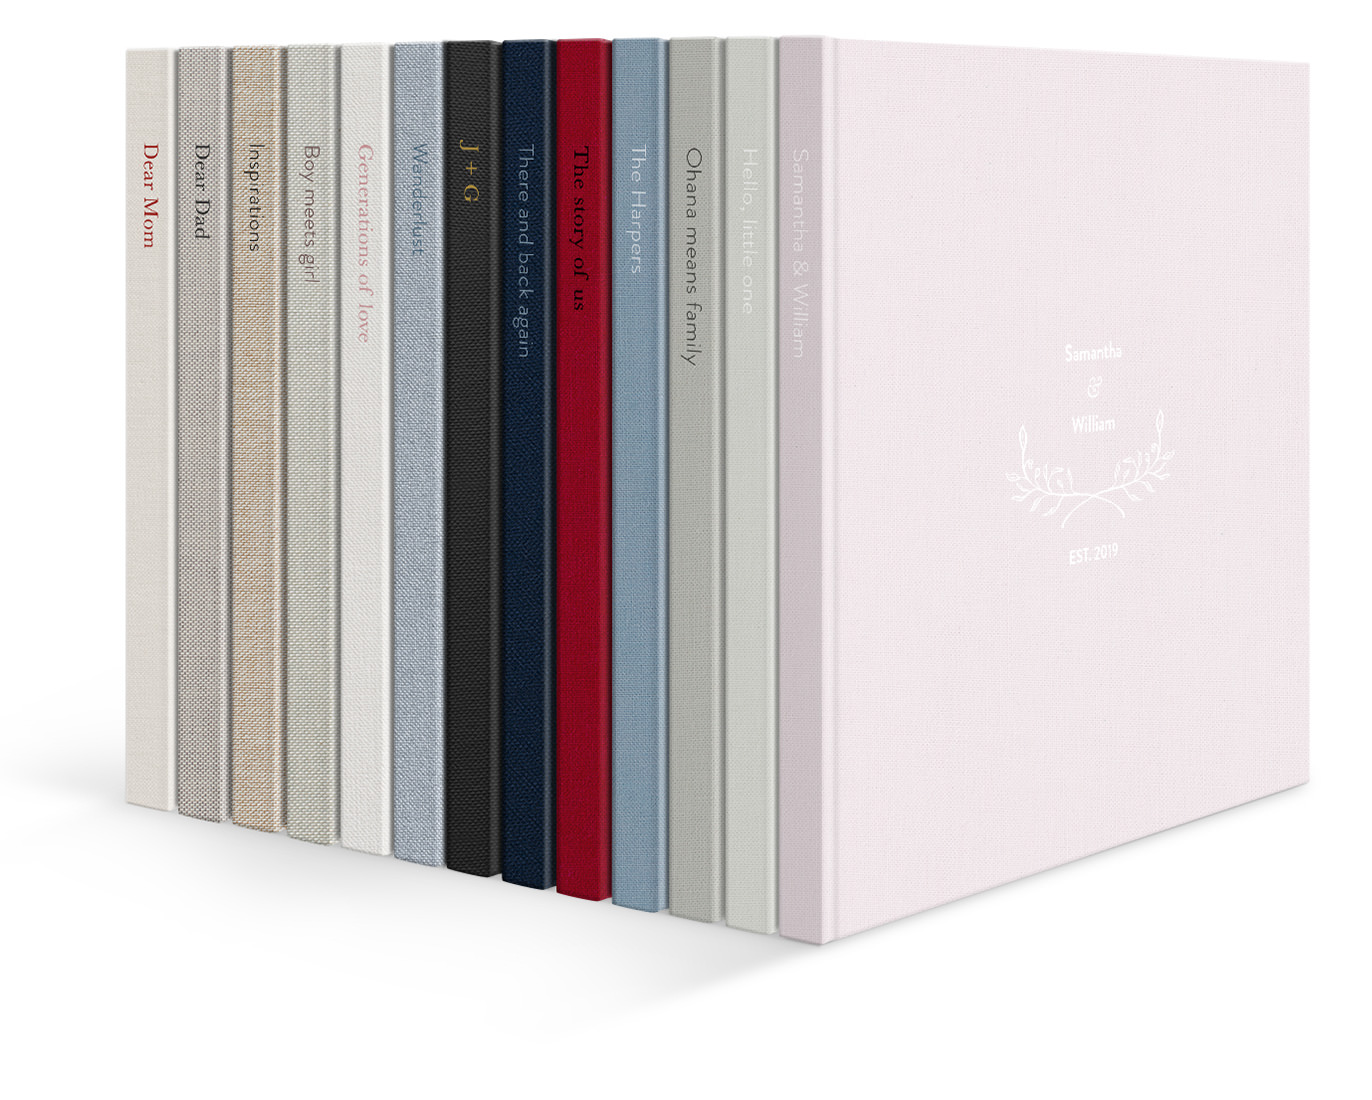 Stack of 13 photo books each with spine text and different fabric colors